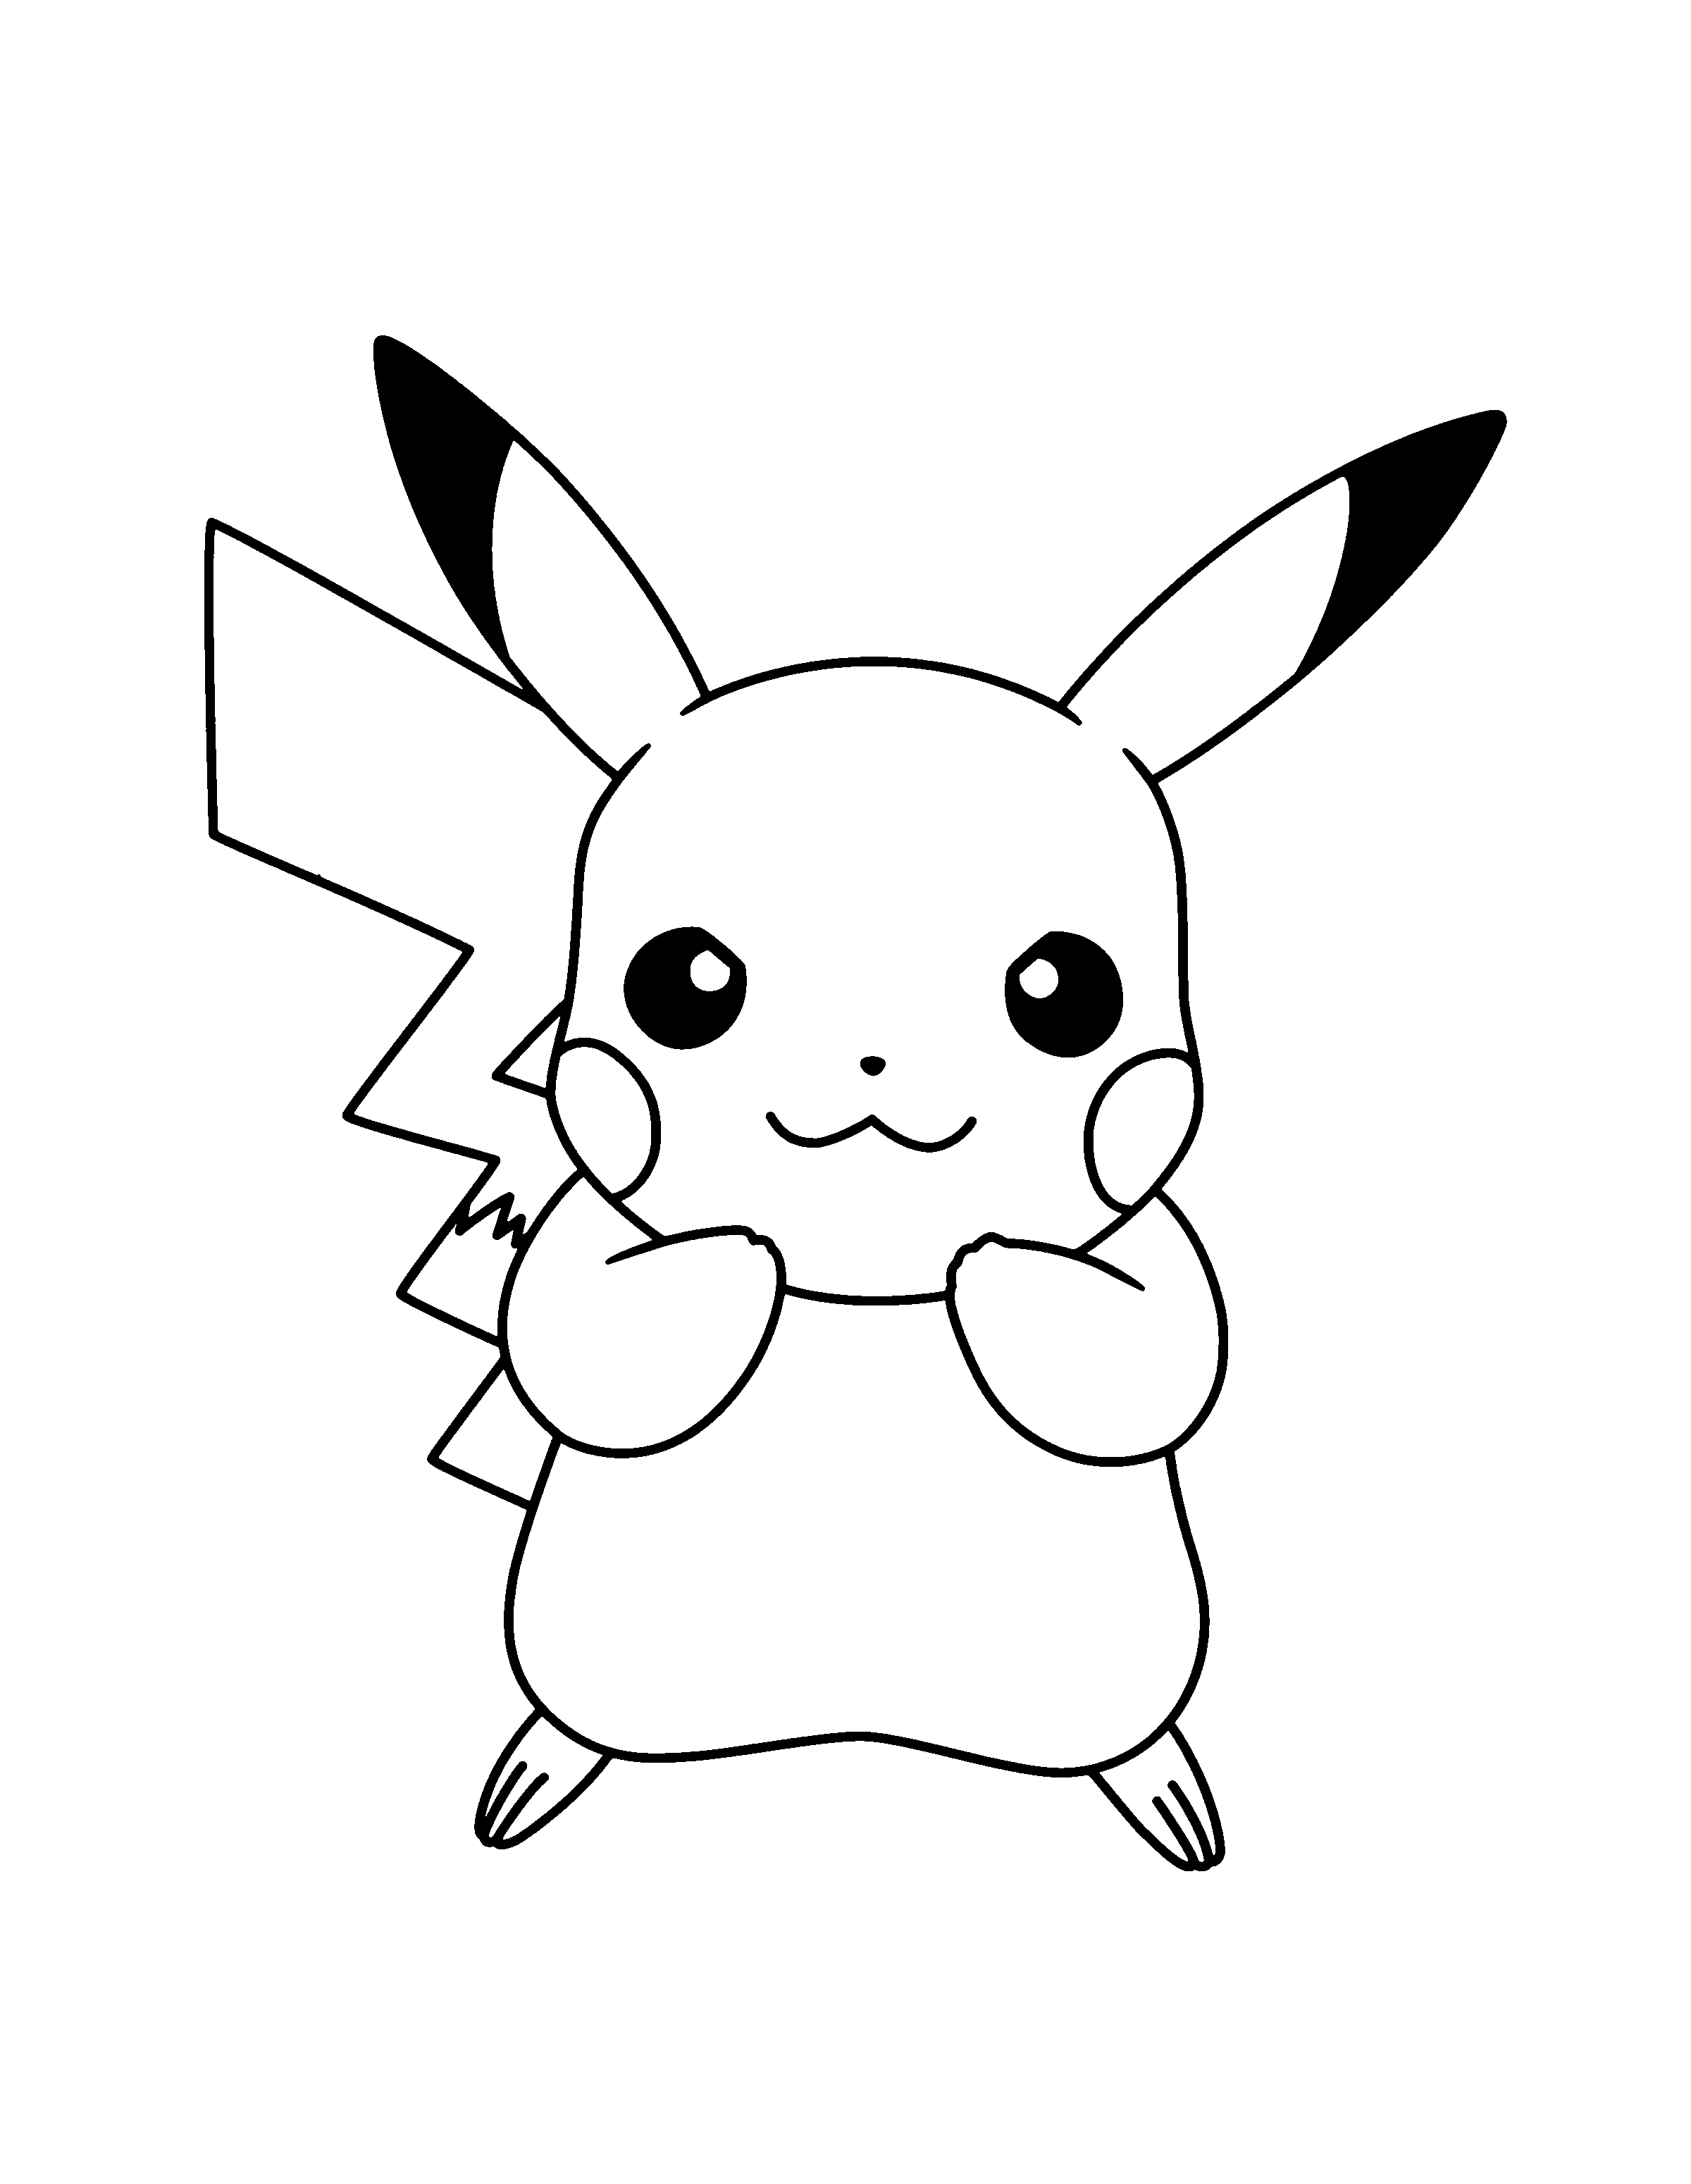 animated-coloring-pages-pokemon-image-0961